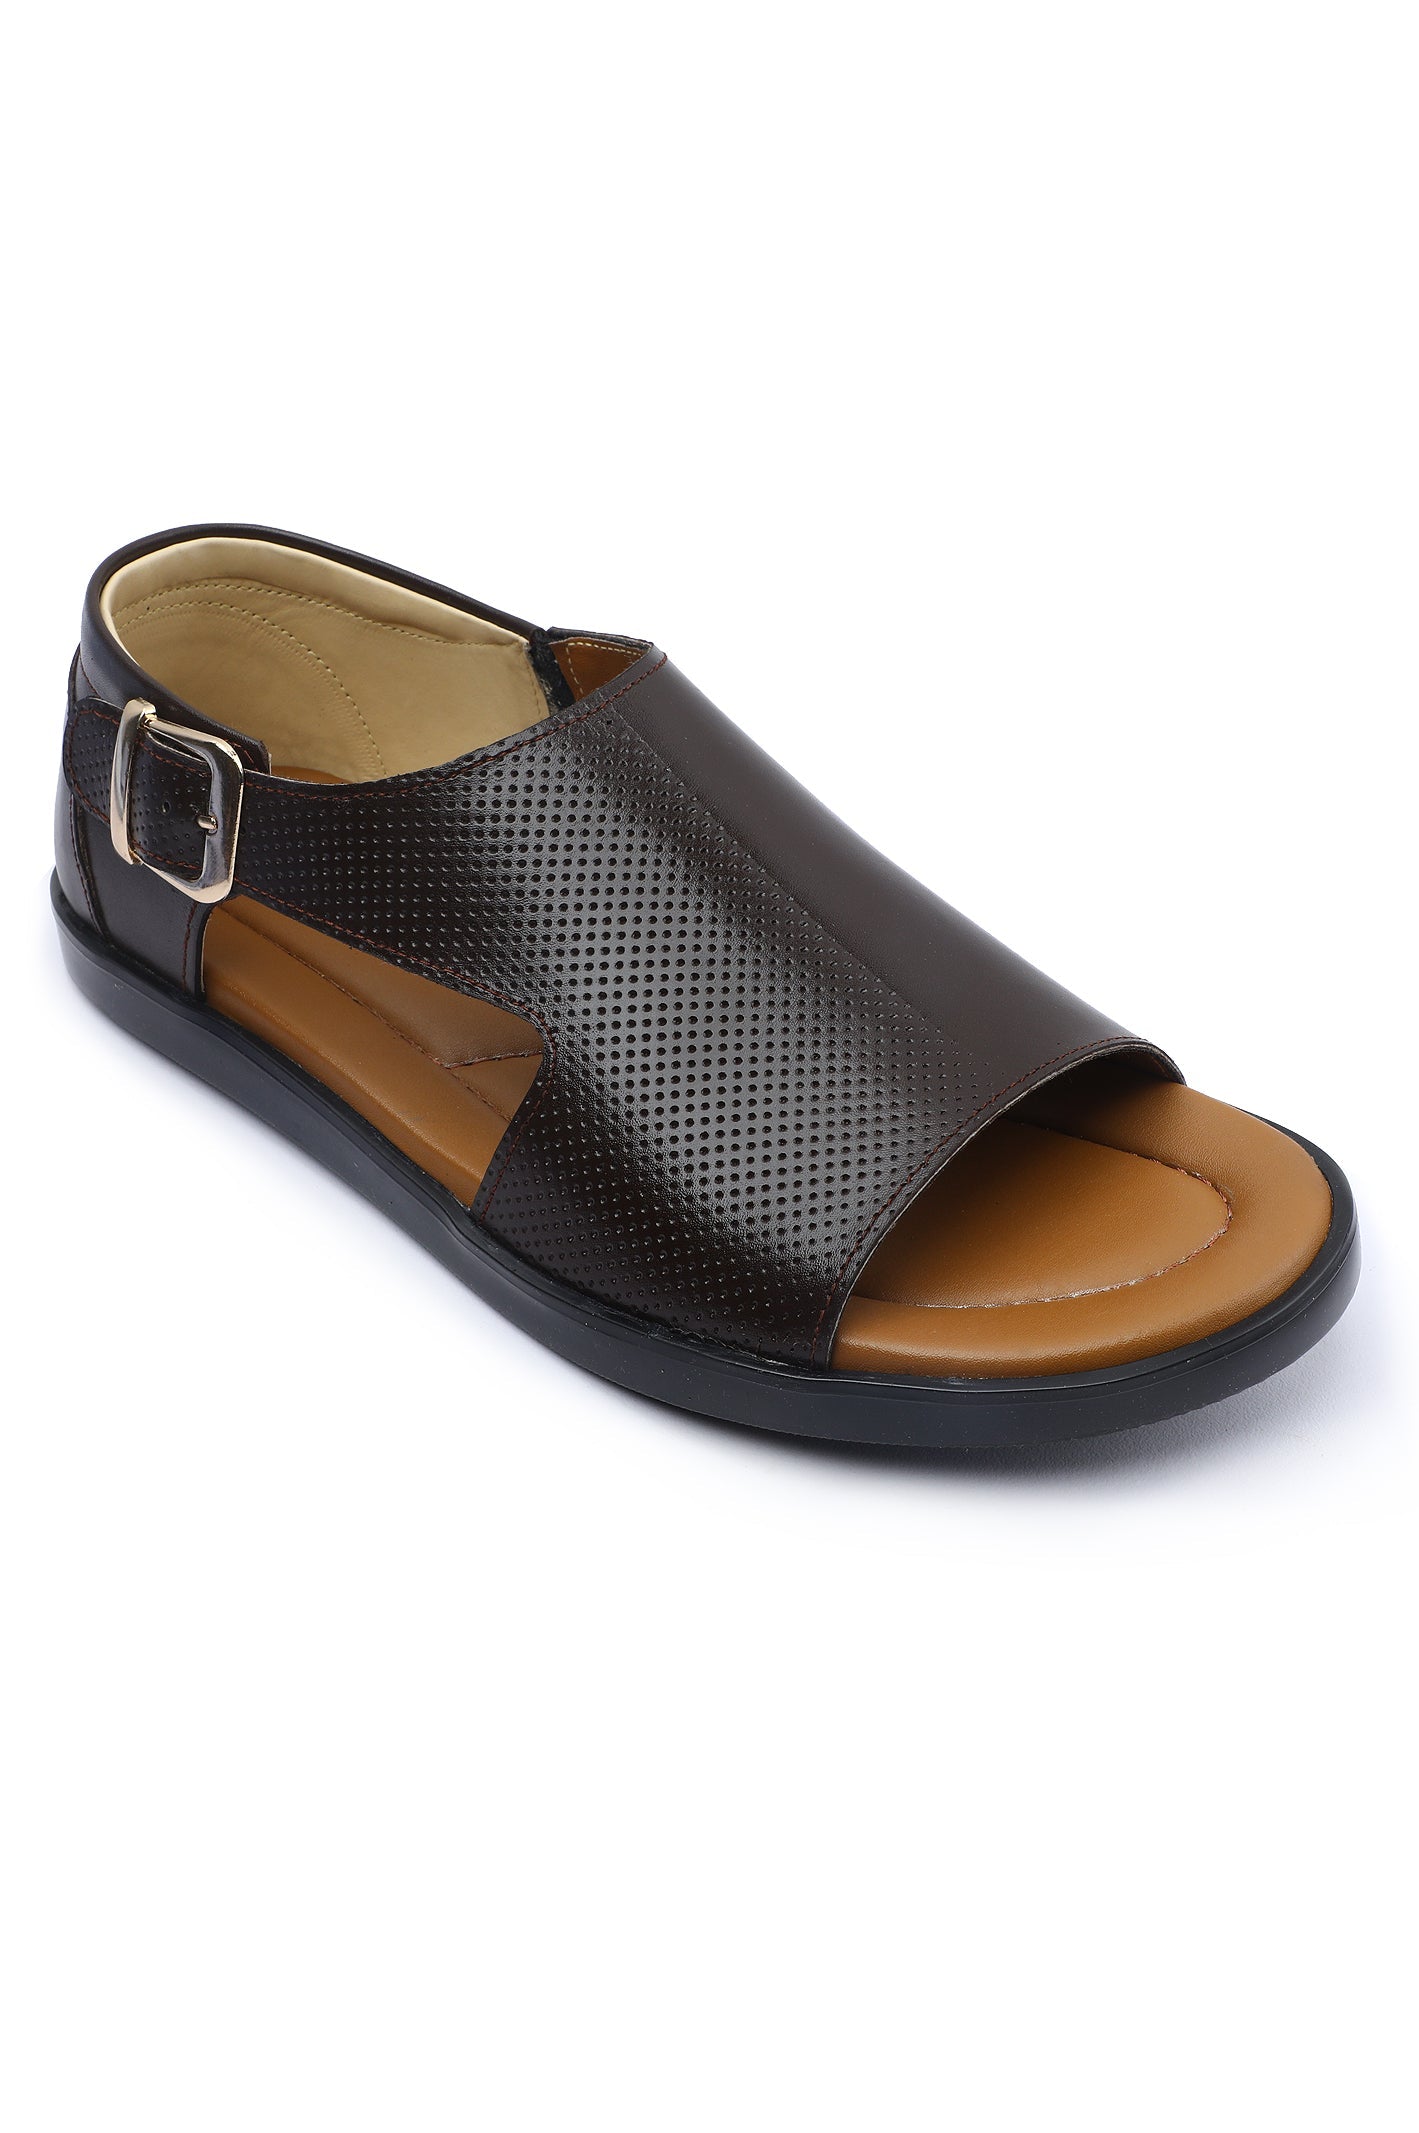 French Emporio Men's Sandal SKU: SLD-0046-COFFEE - Diners